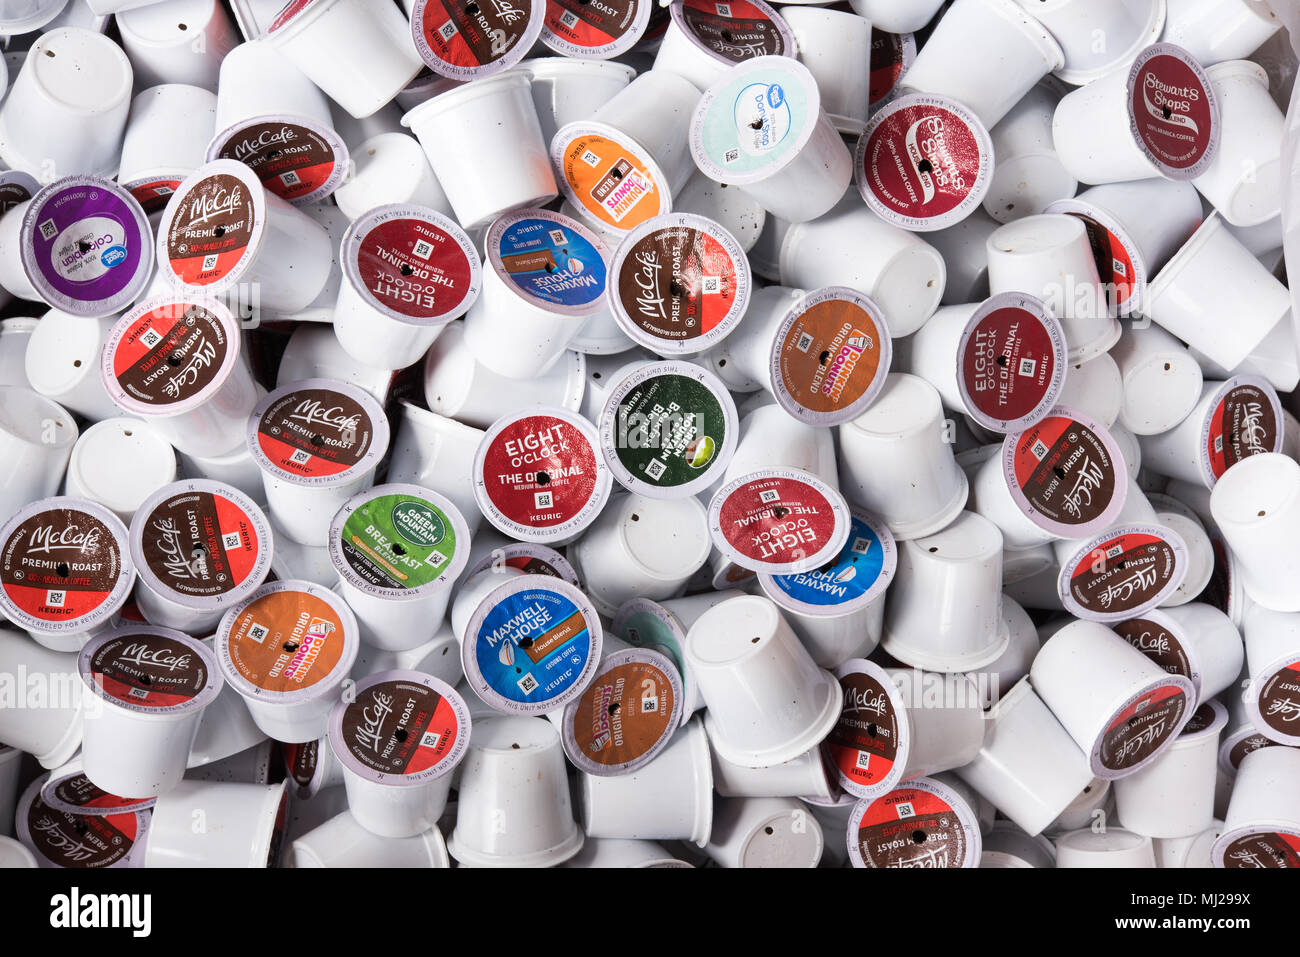 https://c8.alamy.com/comp/MJ299X/a-pile-of-used-discarded-k-cups-in-a-business-office-concept-waste-pollution-excess-consumption-MJ299X.jpg